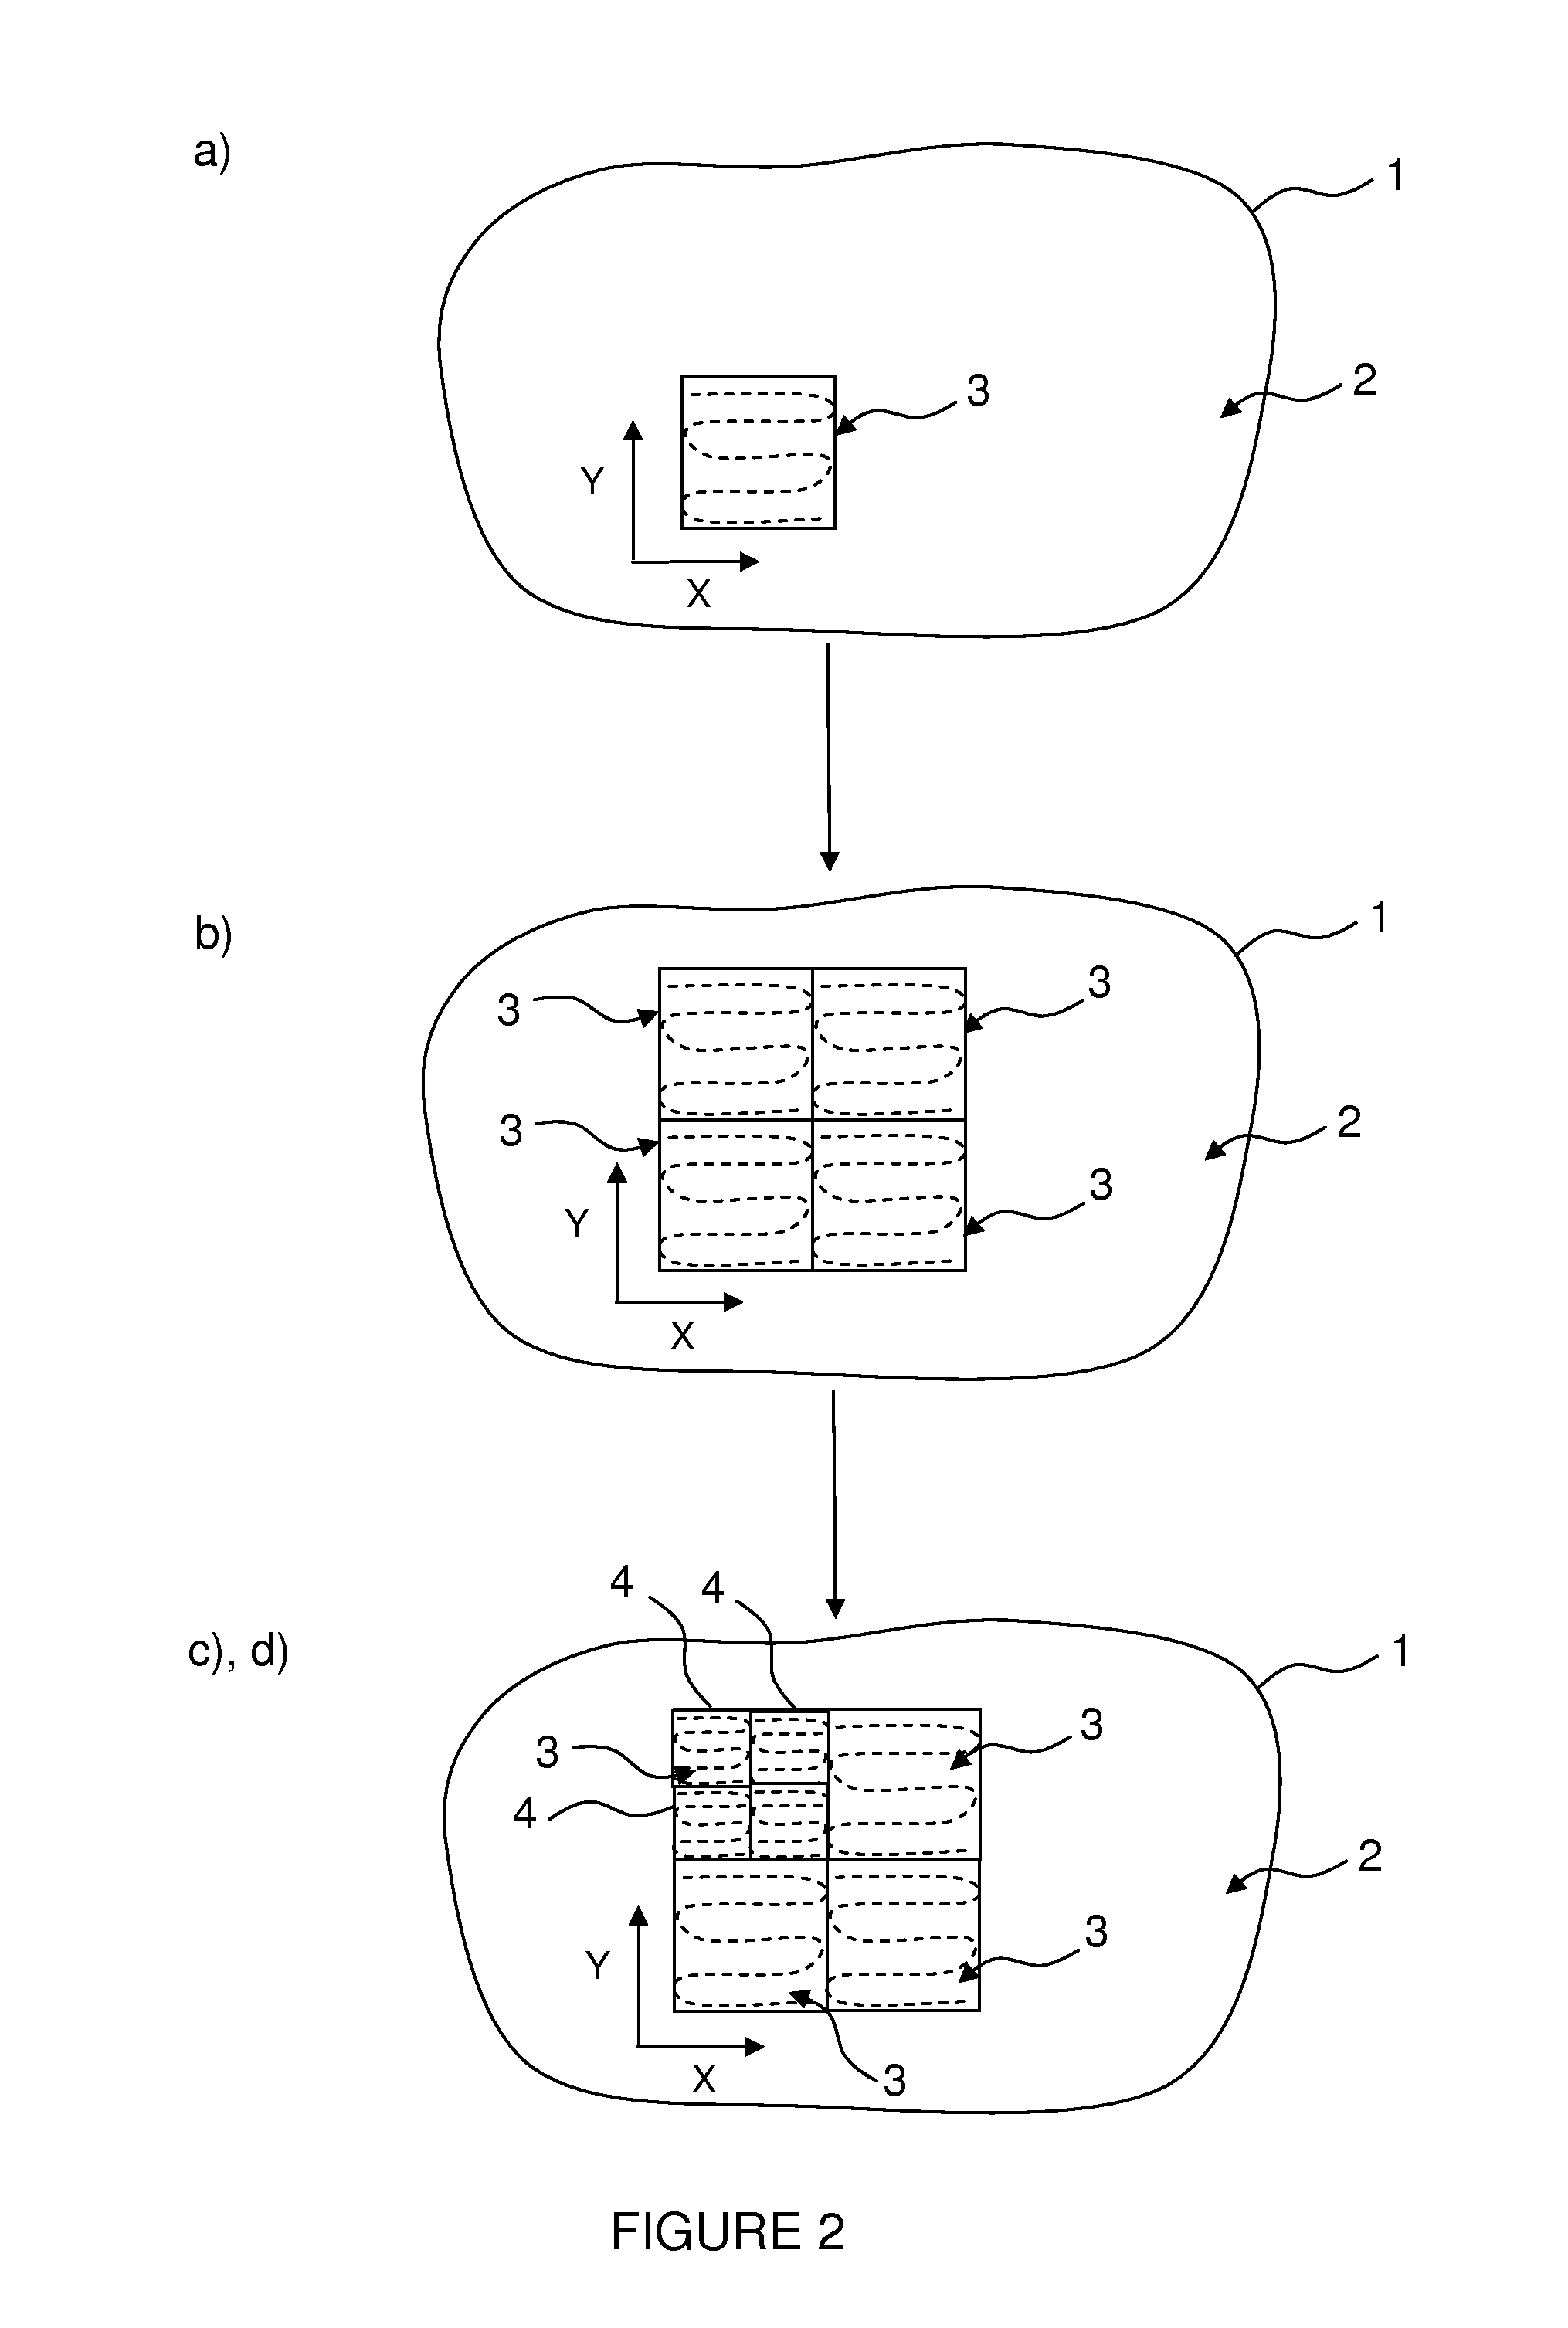 Spectroscopic imaging method and system for exploring the surface of a sample